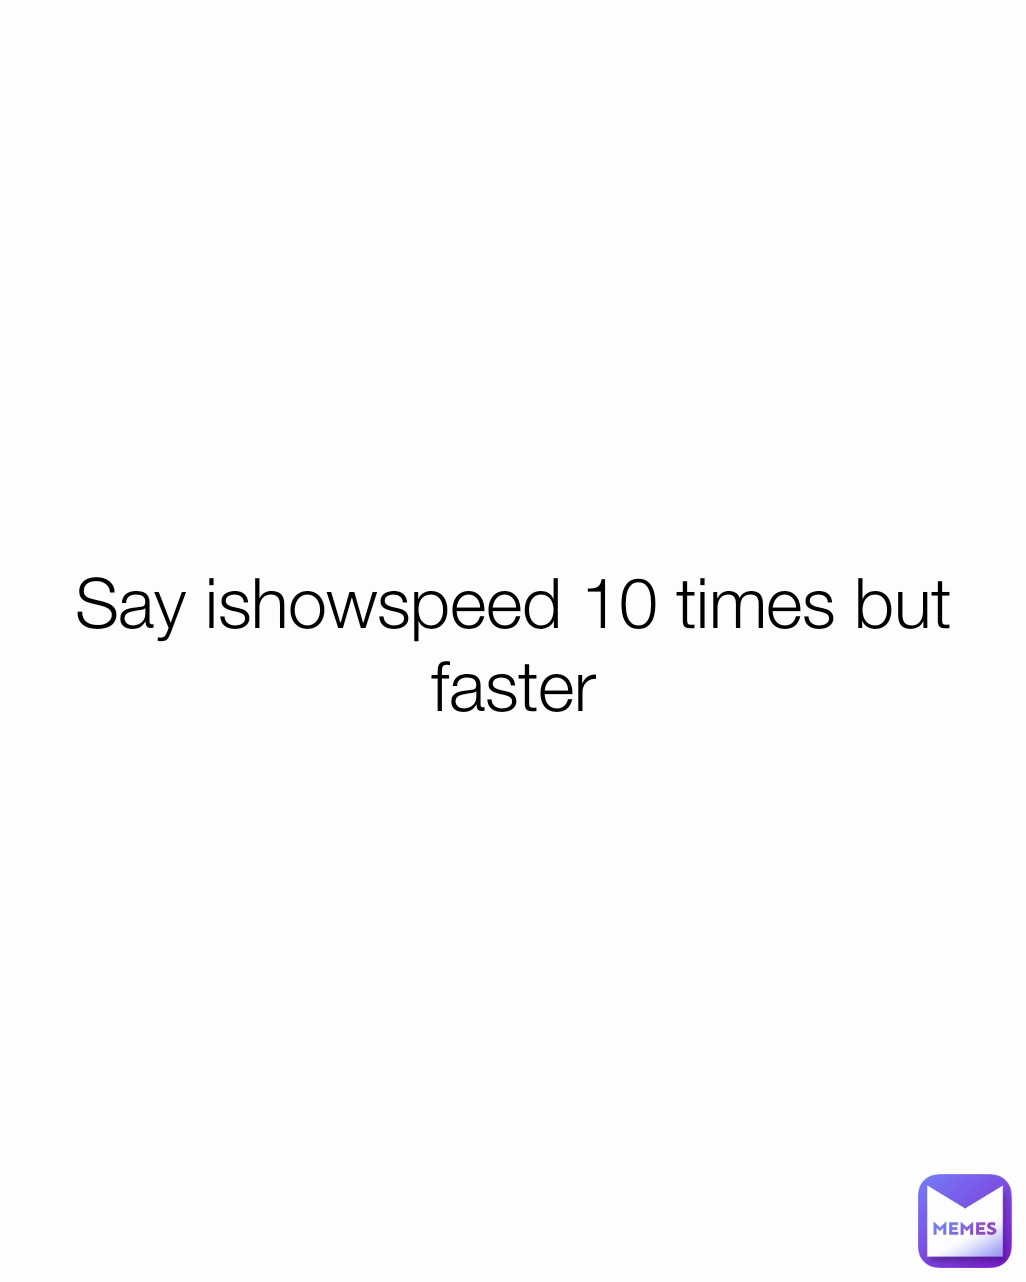 Say ishowspeed 10 times but faster